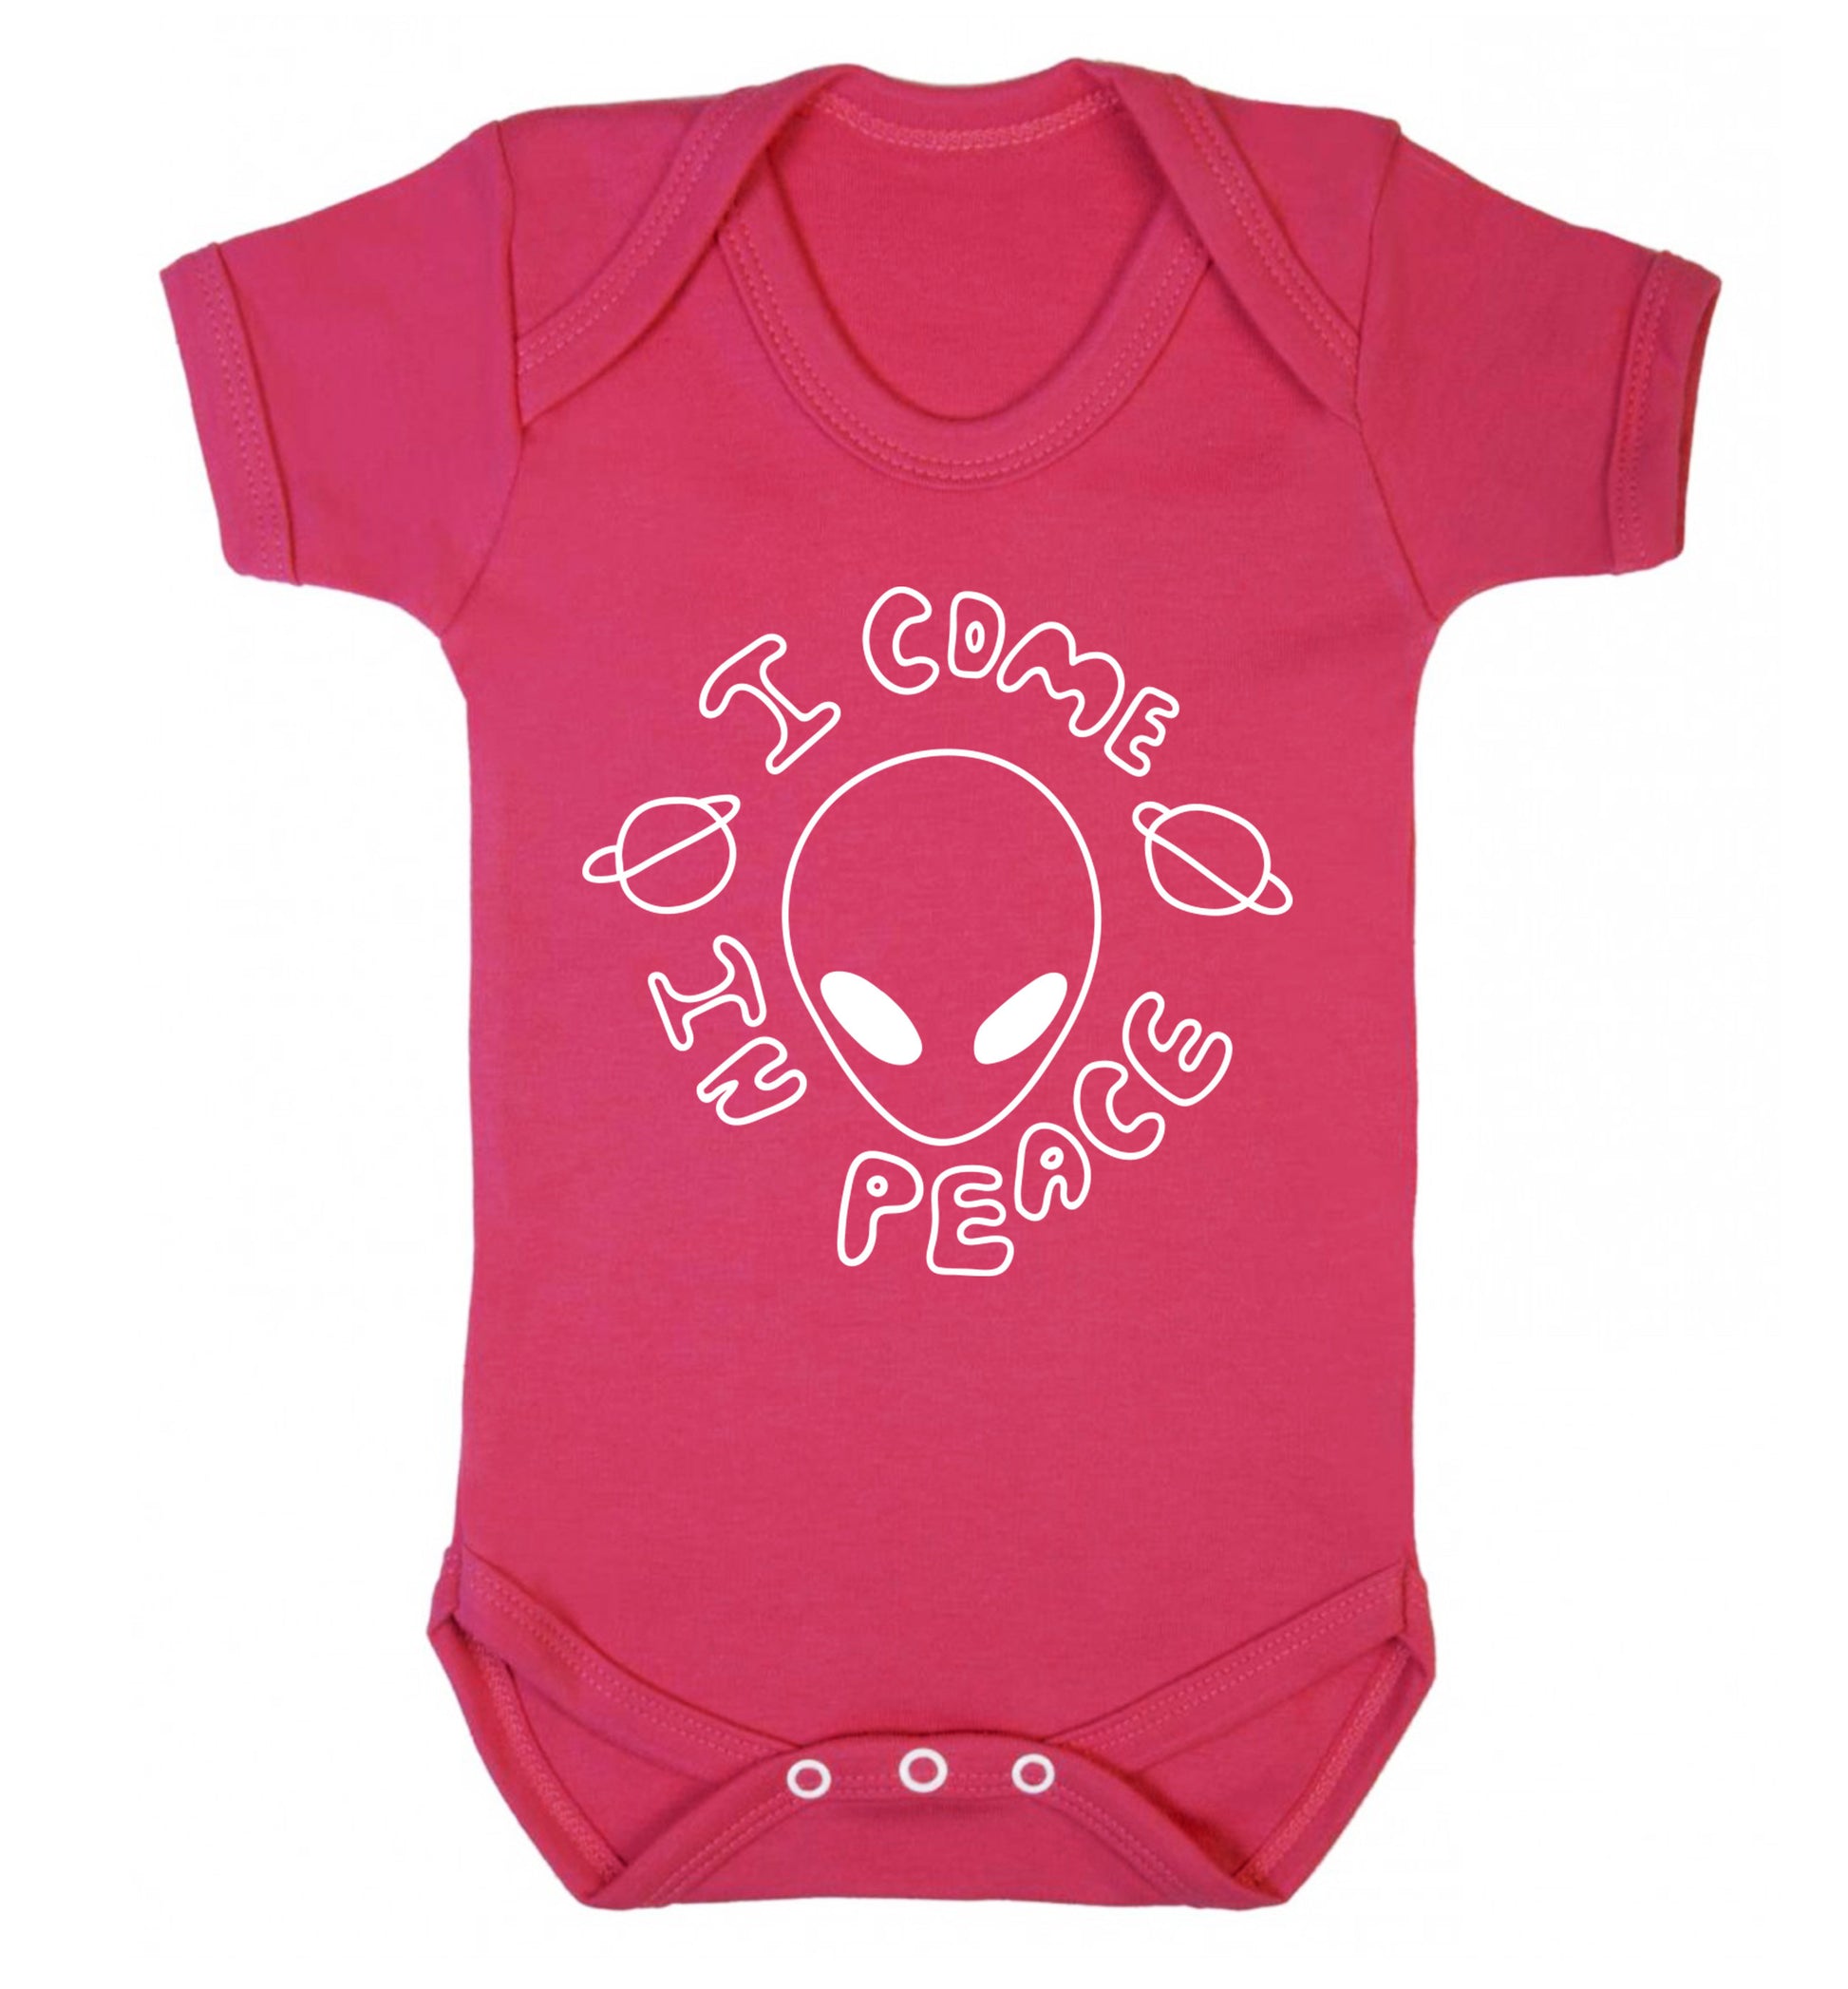 I come in peace Baby Vest dark pink 18-24 months